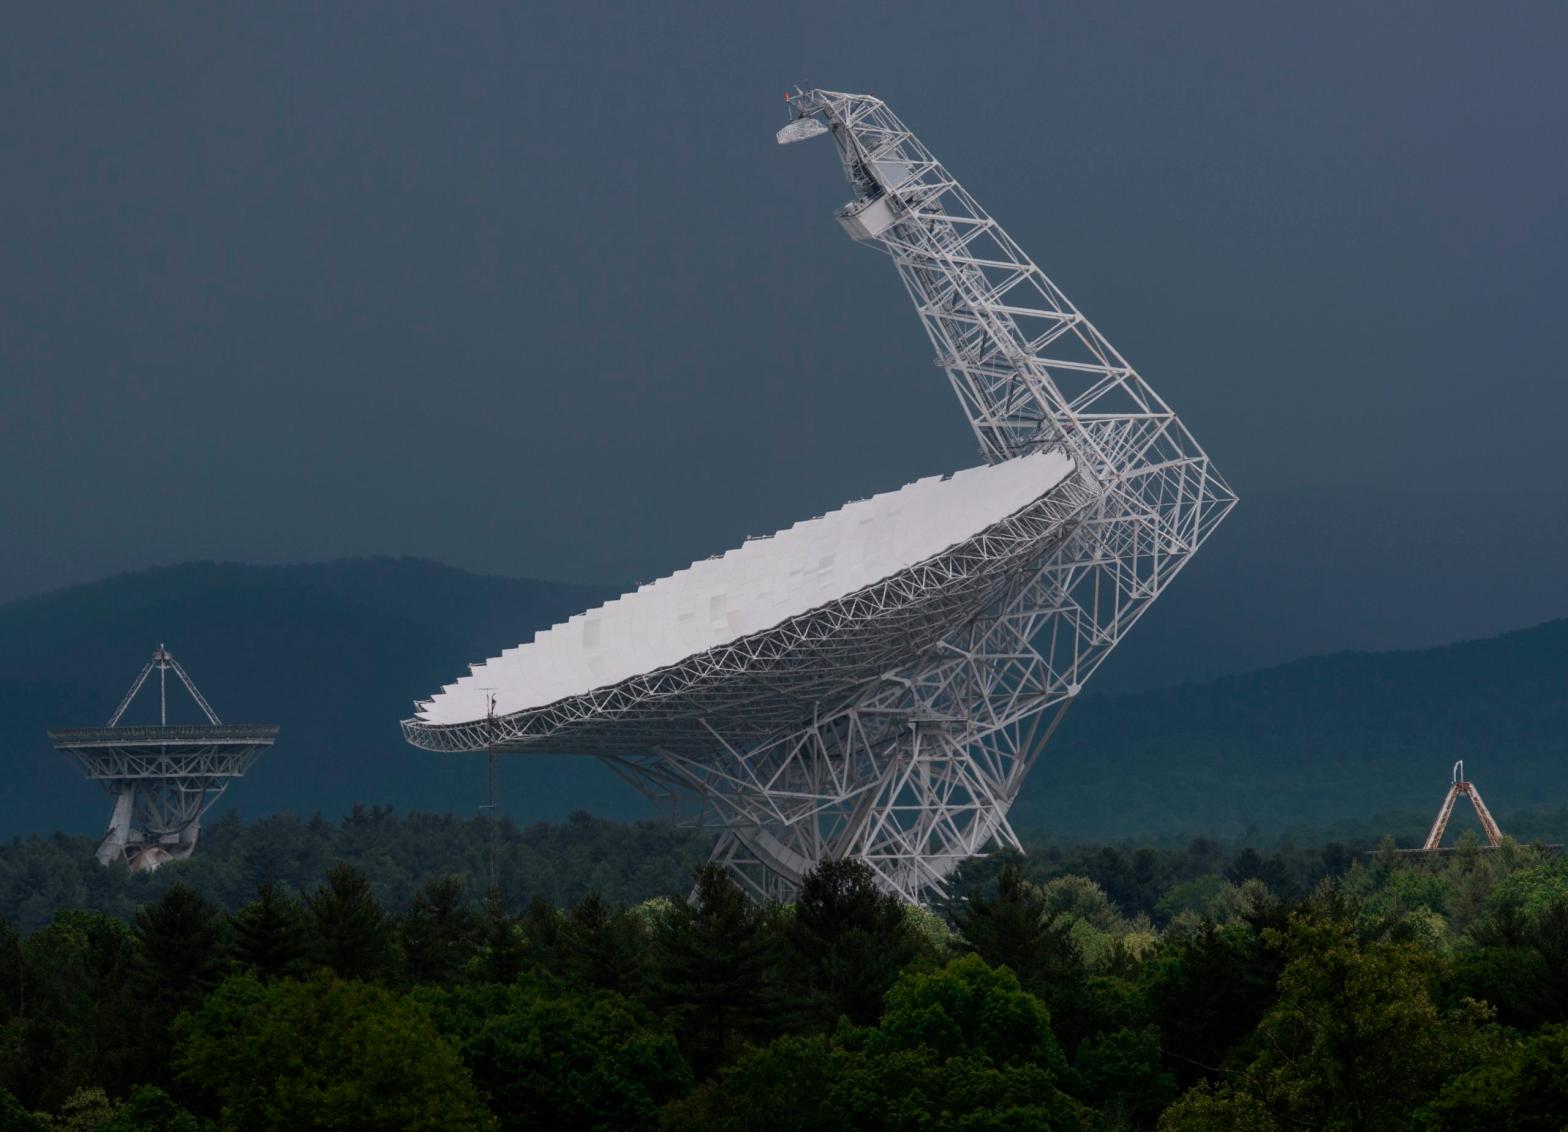 The Green Bank Telescope in West Virginia is aiding in the search for the gravitational wave background. (Photo: ANDREW CABALLERO-REYNOLDS/AFP via Getty Images, Getty Images)